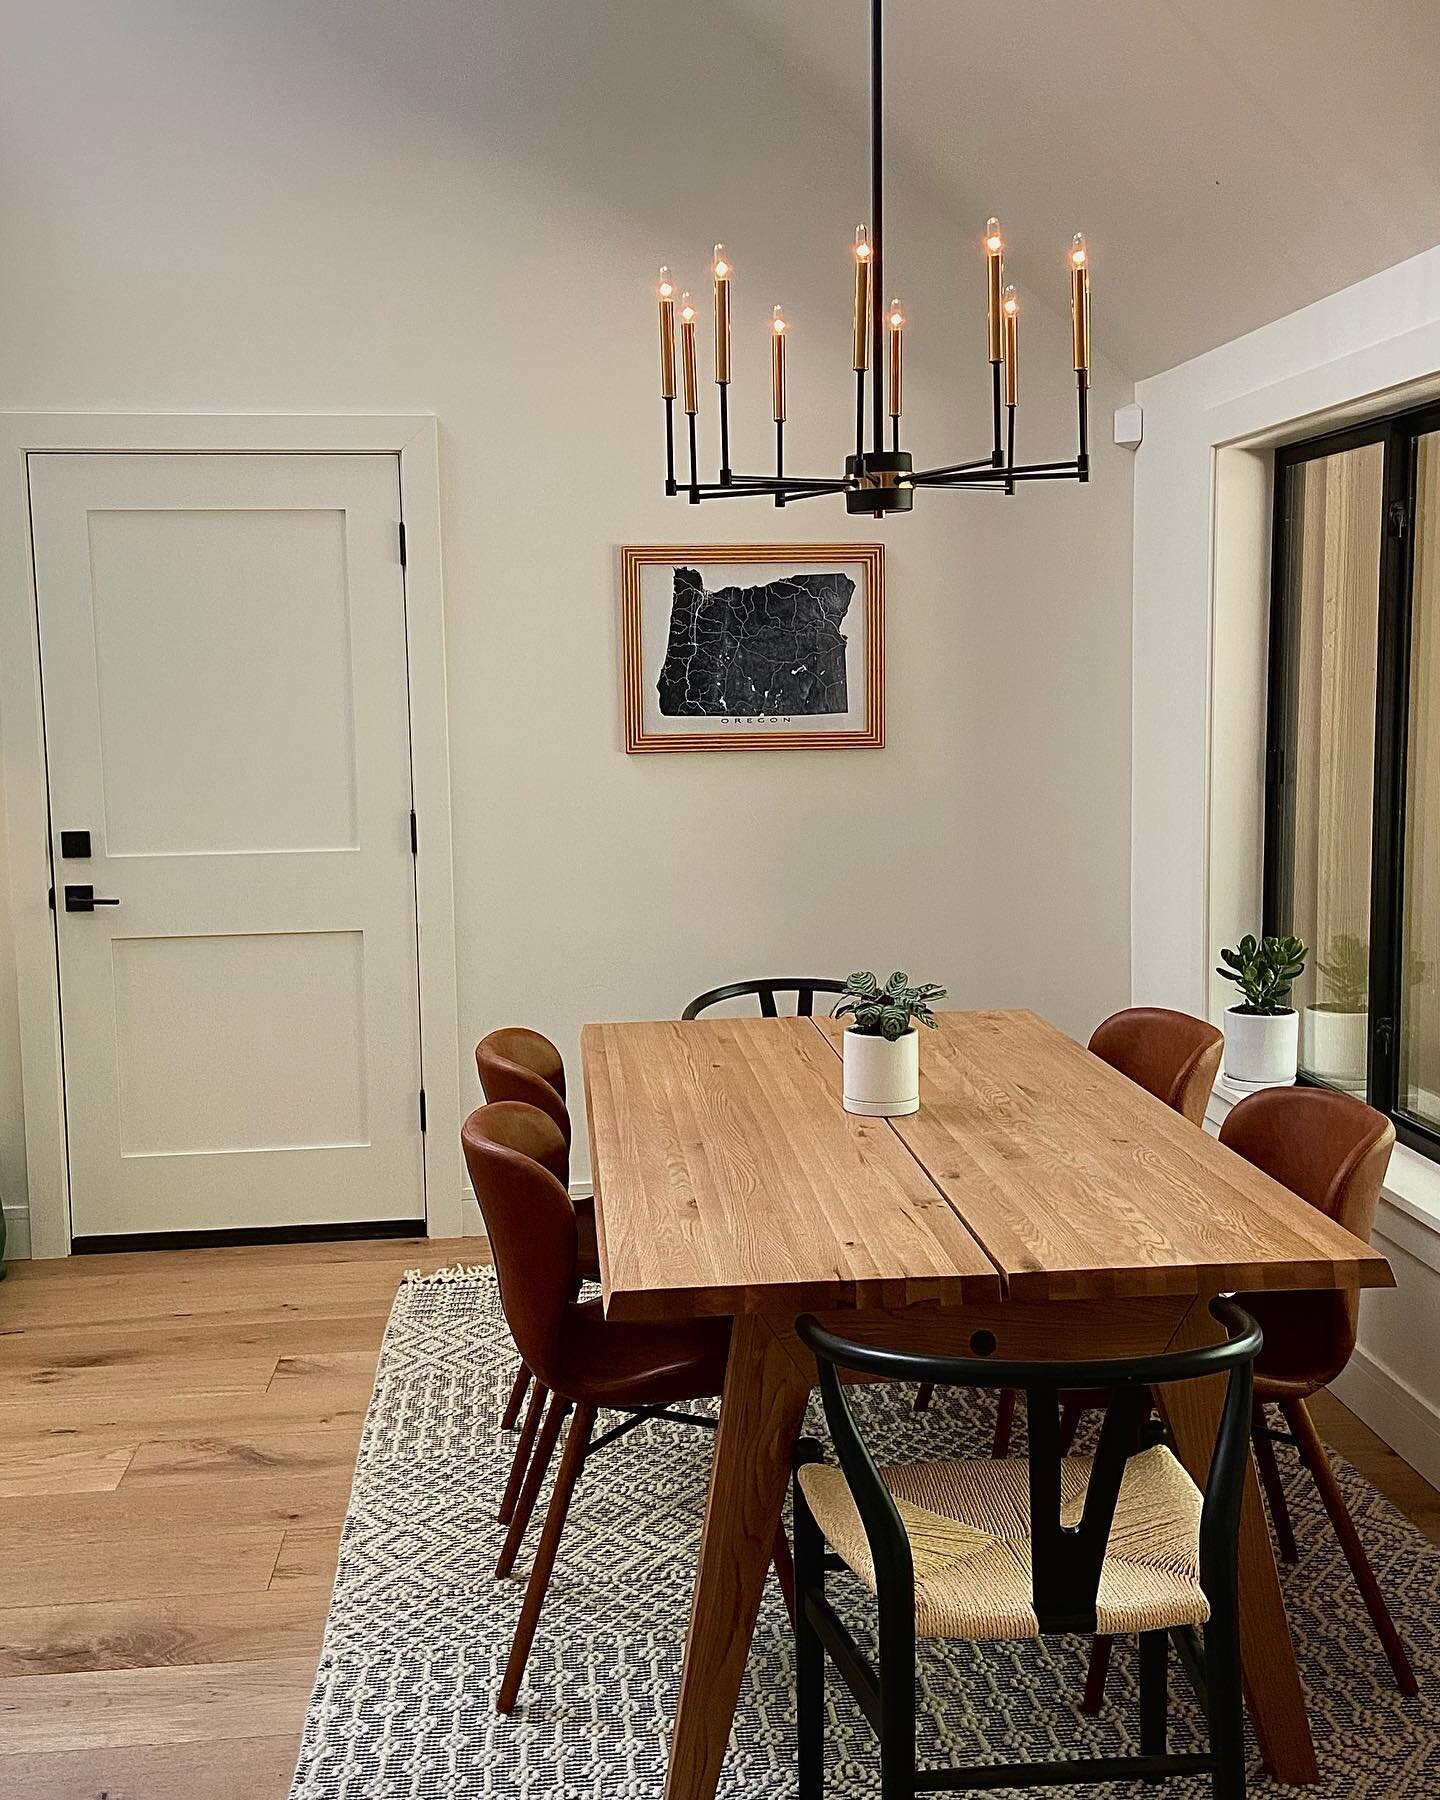 Our house is finally beginning to feel like our home. Looking forward to creating memories and eating delicious food with friends and family around this table.  #cookhouseremodel #portlandcontractor #diningroom